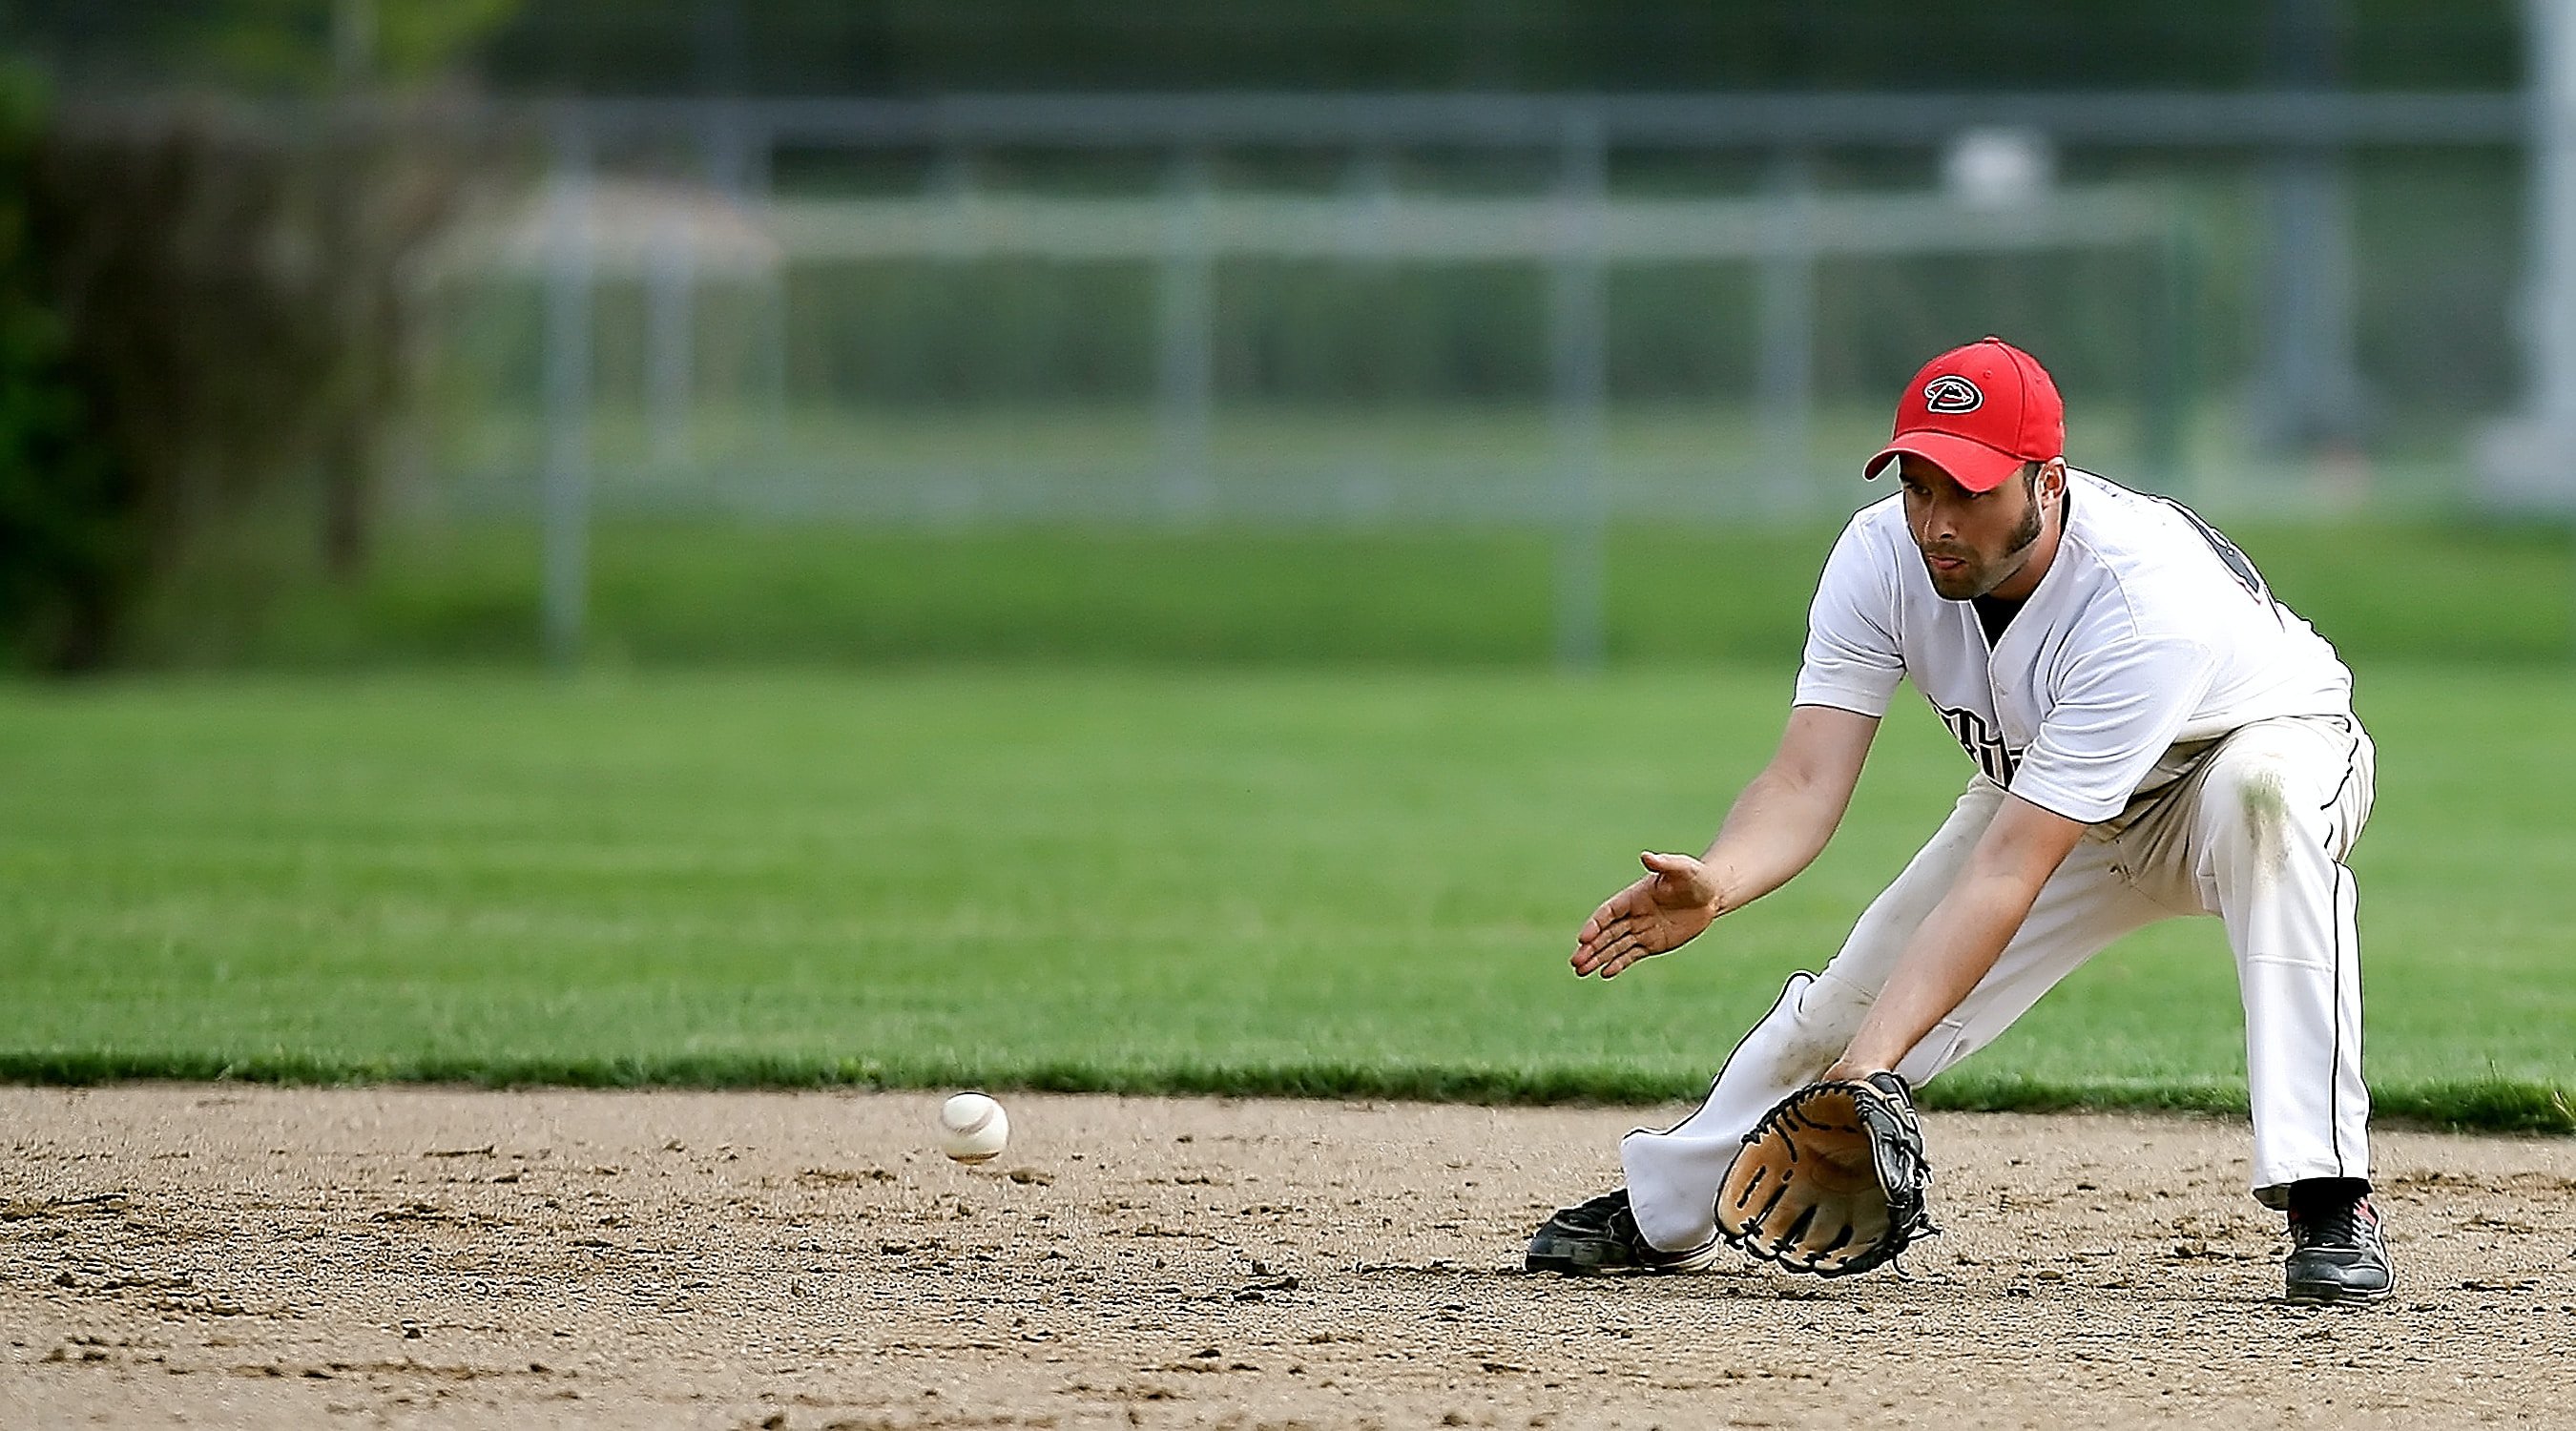 A baseball fielder looking to make a tag out.